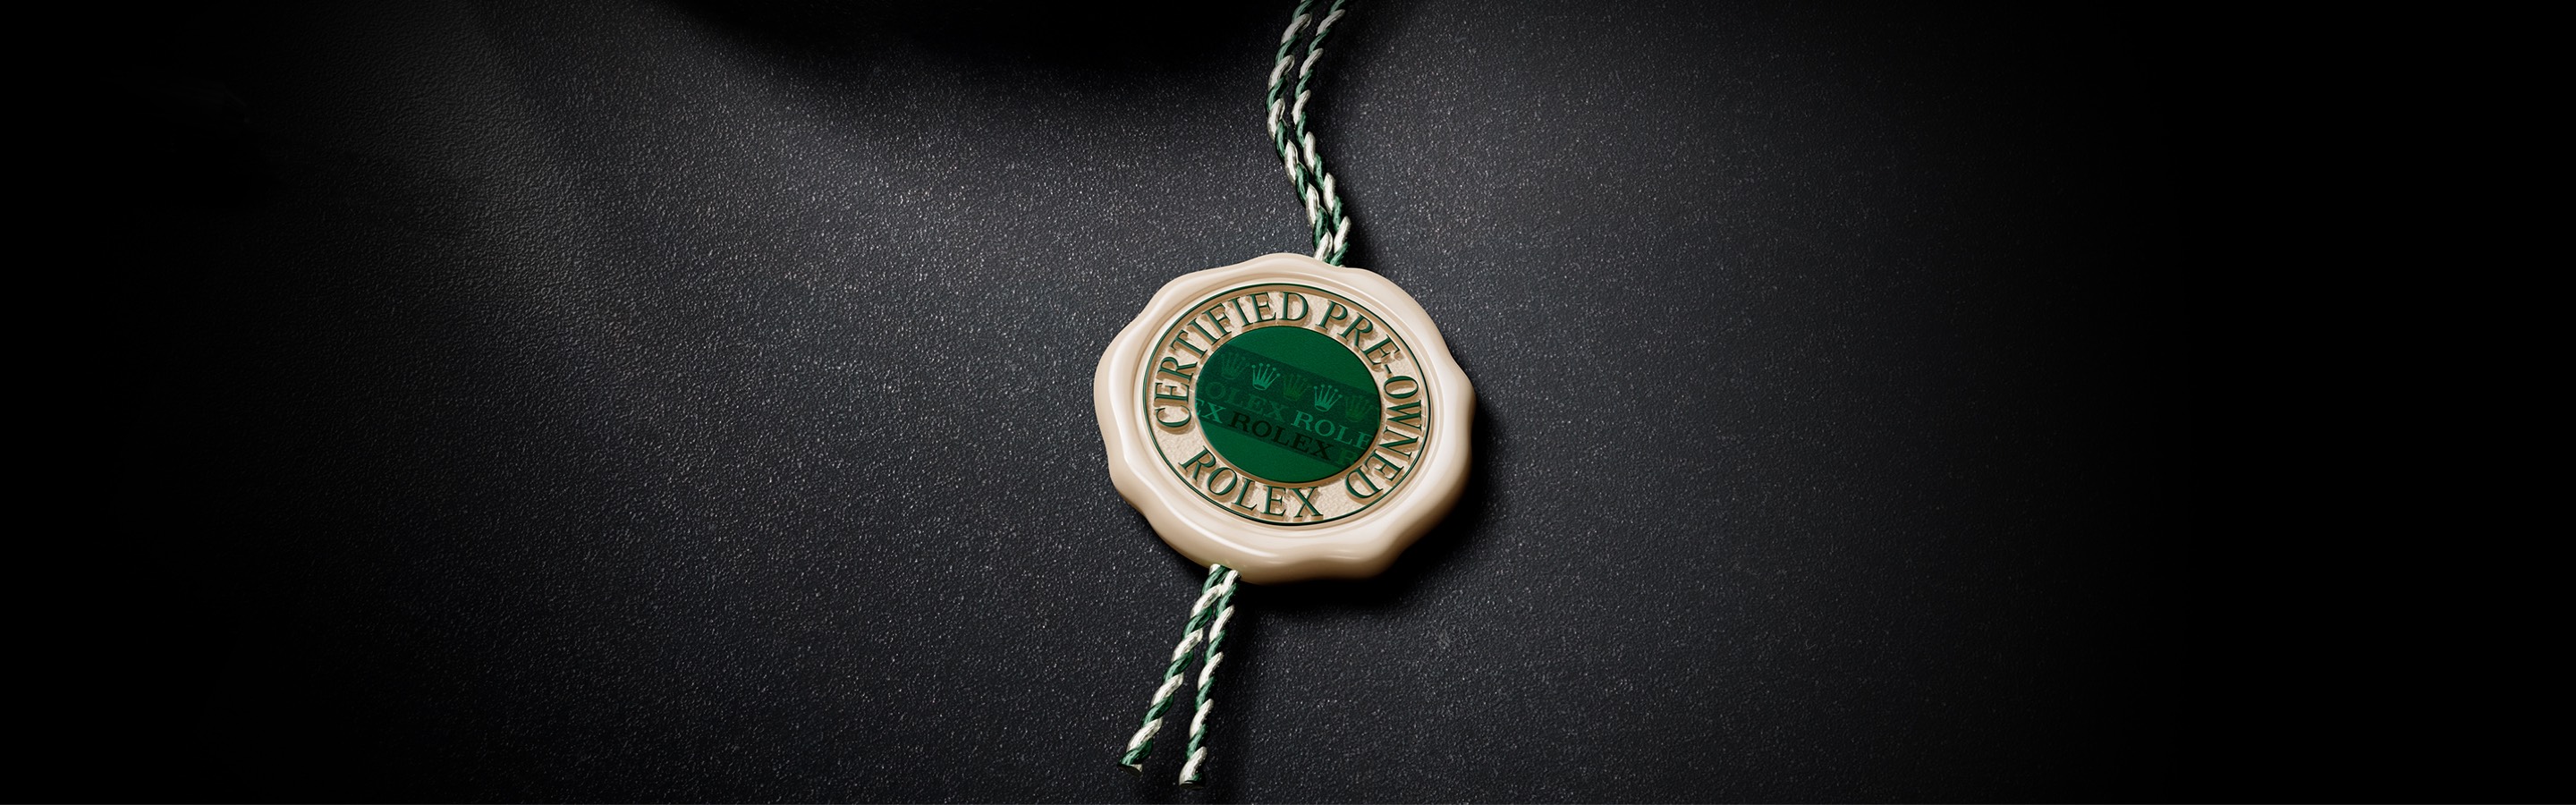 rolex-certified-pre-owned-at - Radcliffe Jewelers